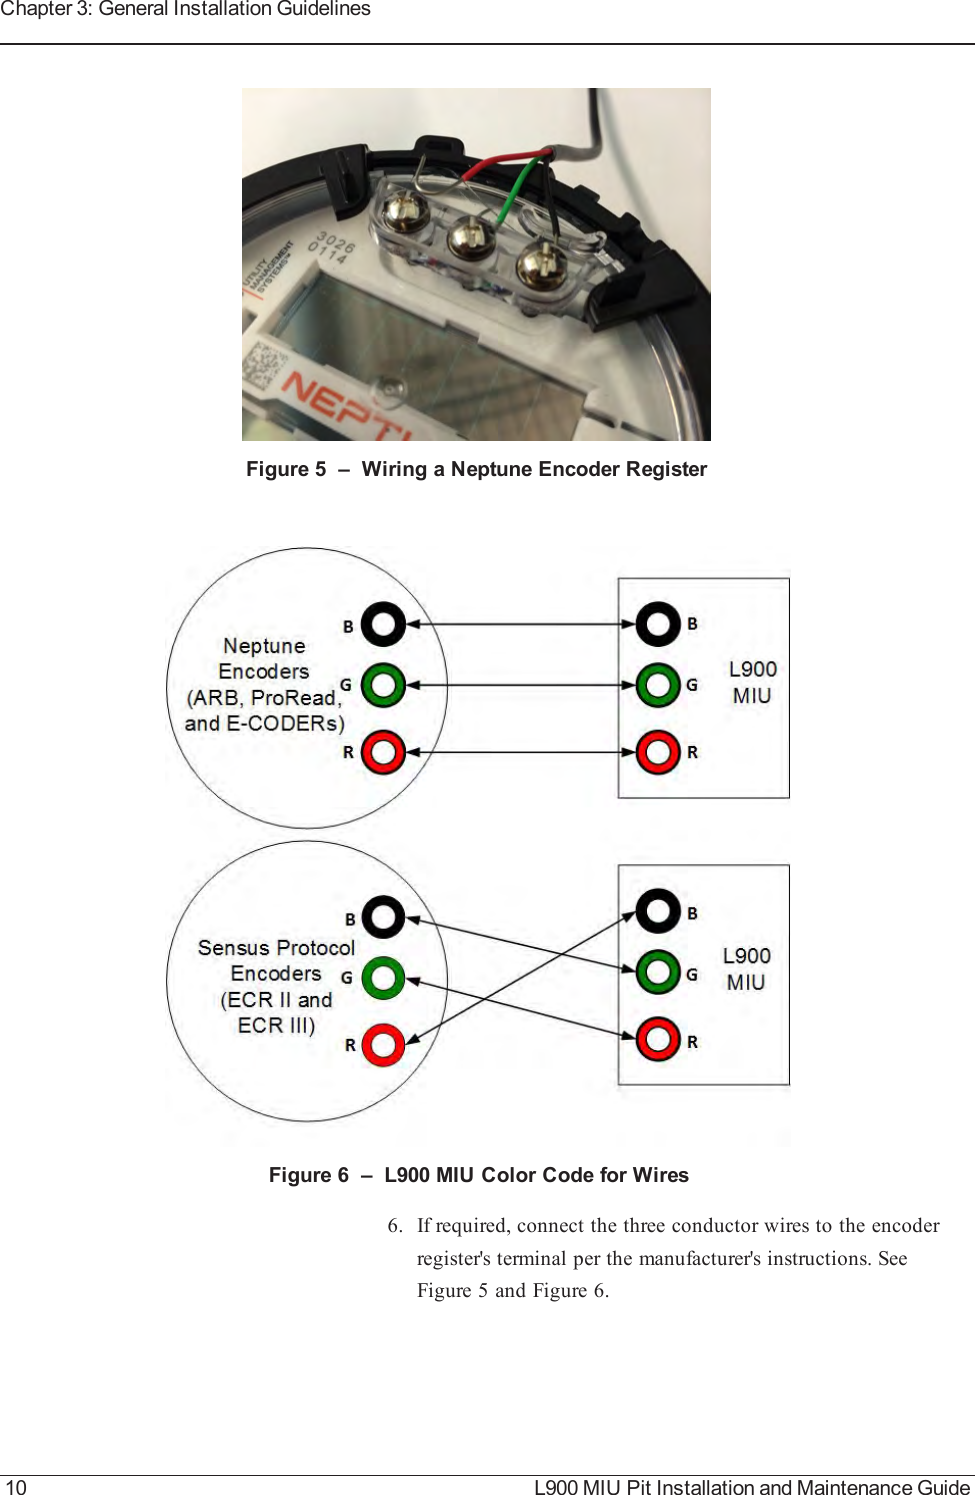 Figure 5 – Wiring a Neptune Encoder RegisterFigure 6 – L900 MIU Color Code for Wires6. If required, connect the three conductor wires to the encoderregister&apos;s terminal per the manufacturer&apos;s instructions. SeeFigure 5 and Figure 6.10 L900 MIU Pit Installation and Maintenance GuideChapter 3: General Installation Guidelines